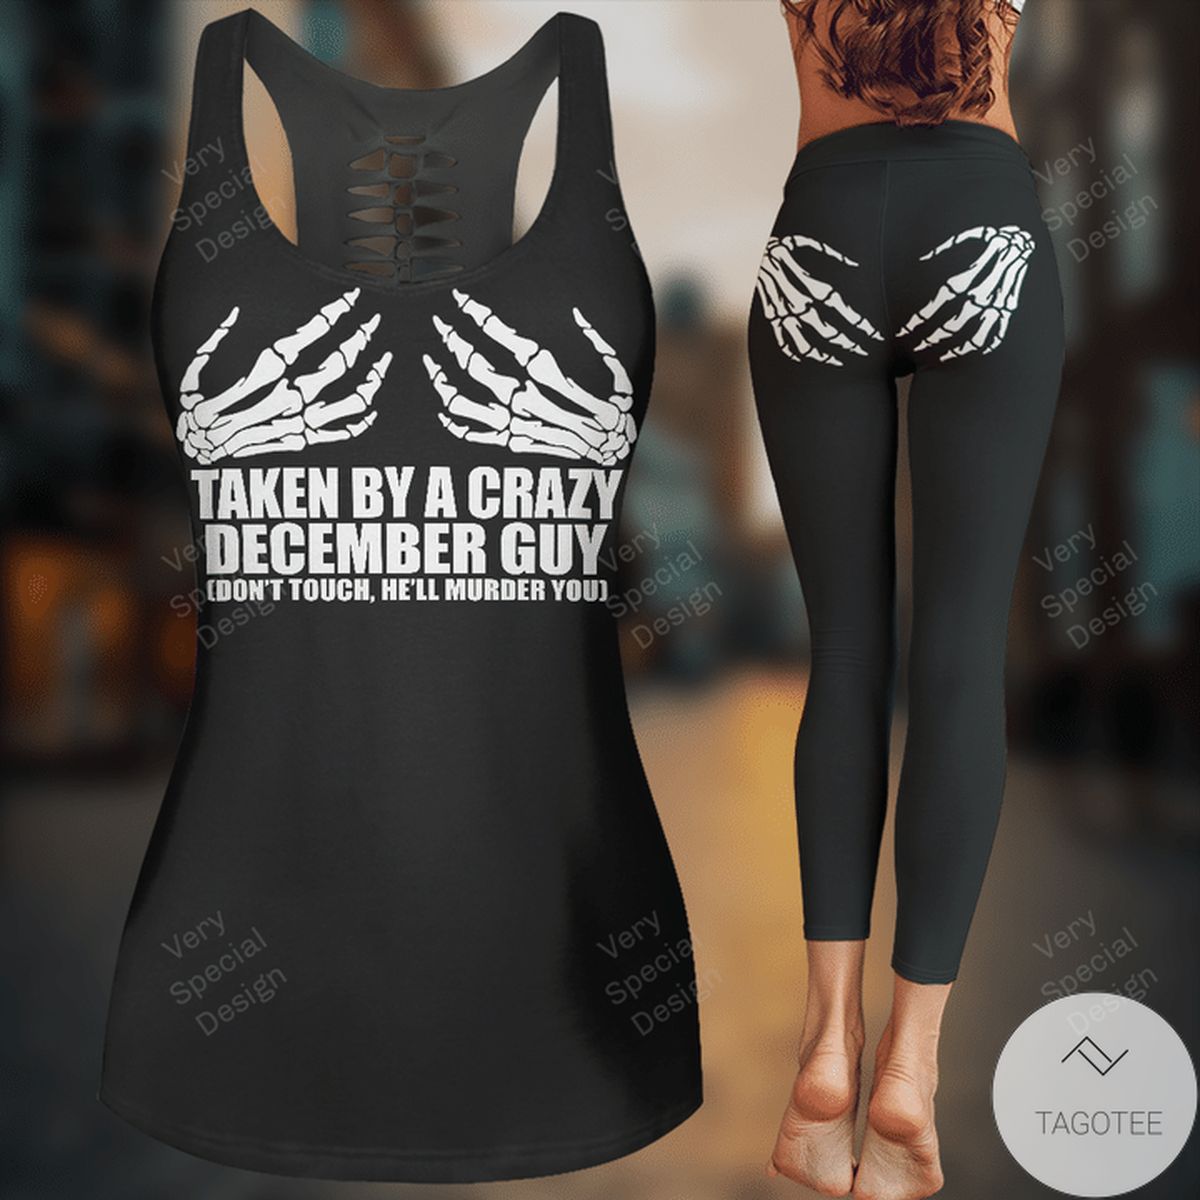 Taken By A Crazy December Guy Hollow Tank Top And Leggings